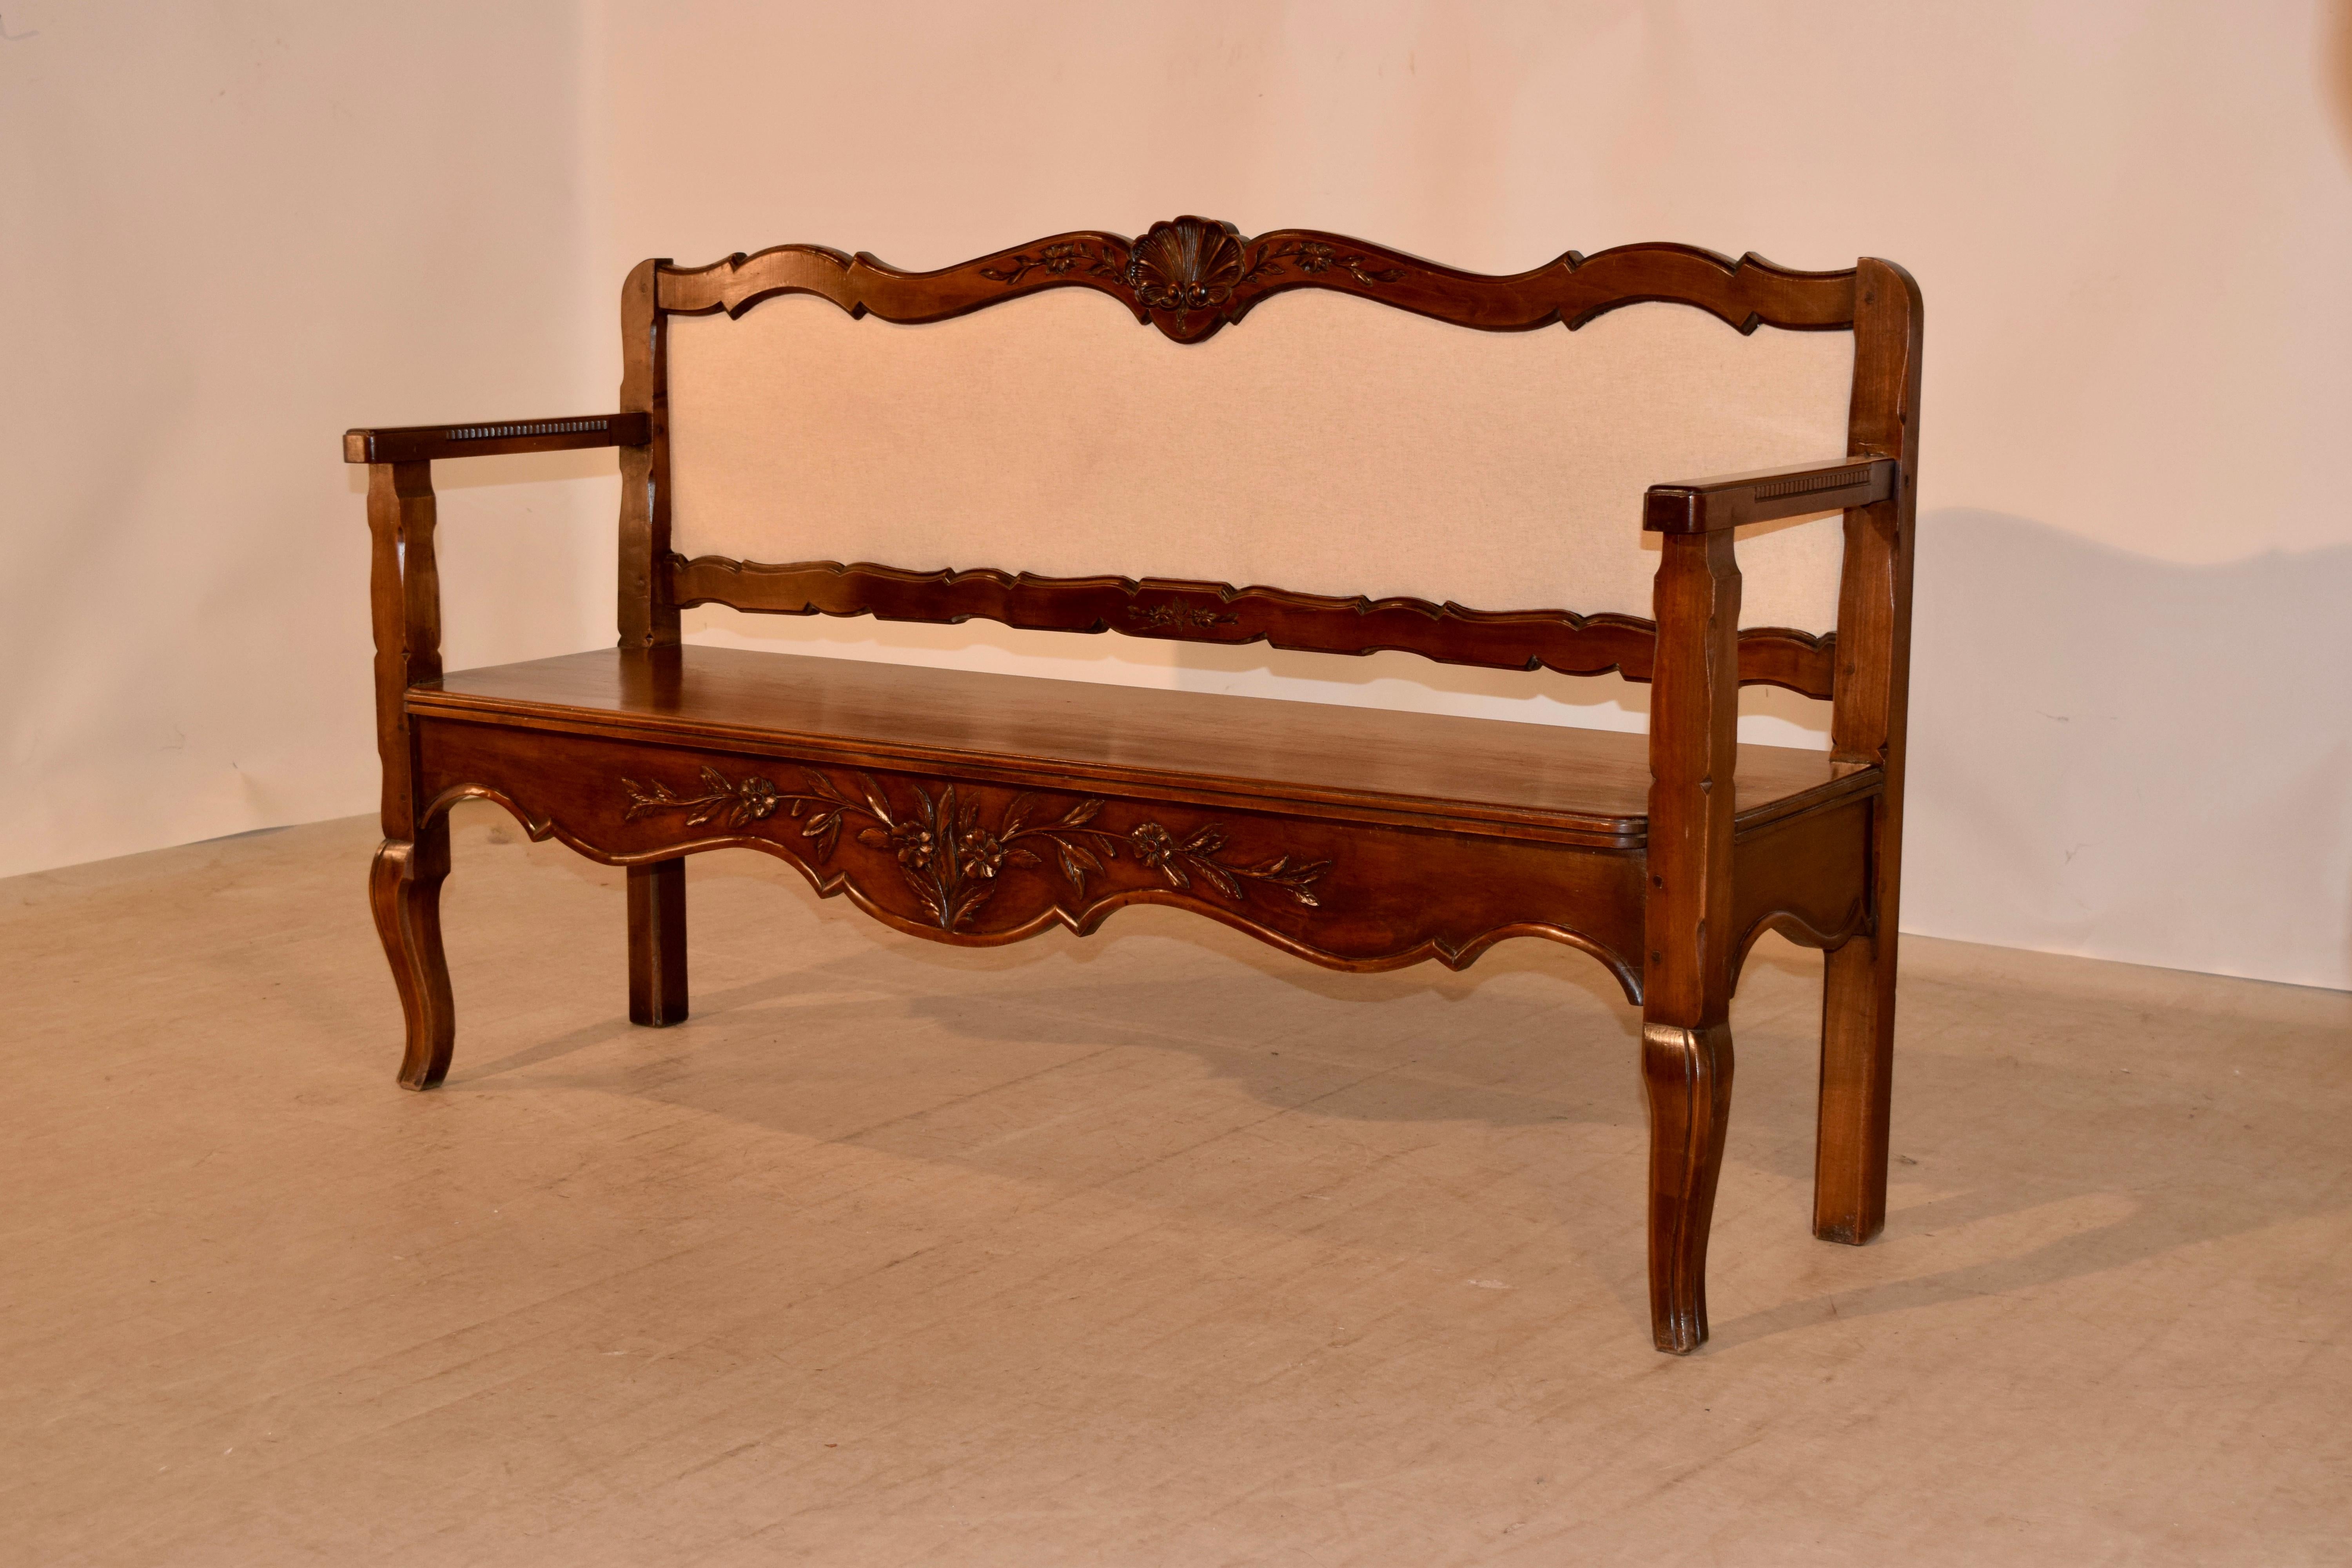 19th century walnut bench from France with a scalloped and hand carved frame with an upholstered back newly covered in linen following down to a solid walnut seat supported on cabriole carved legs in the front and solid legs in the back and a